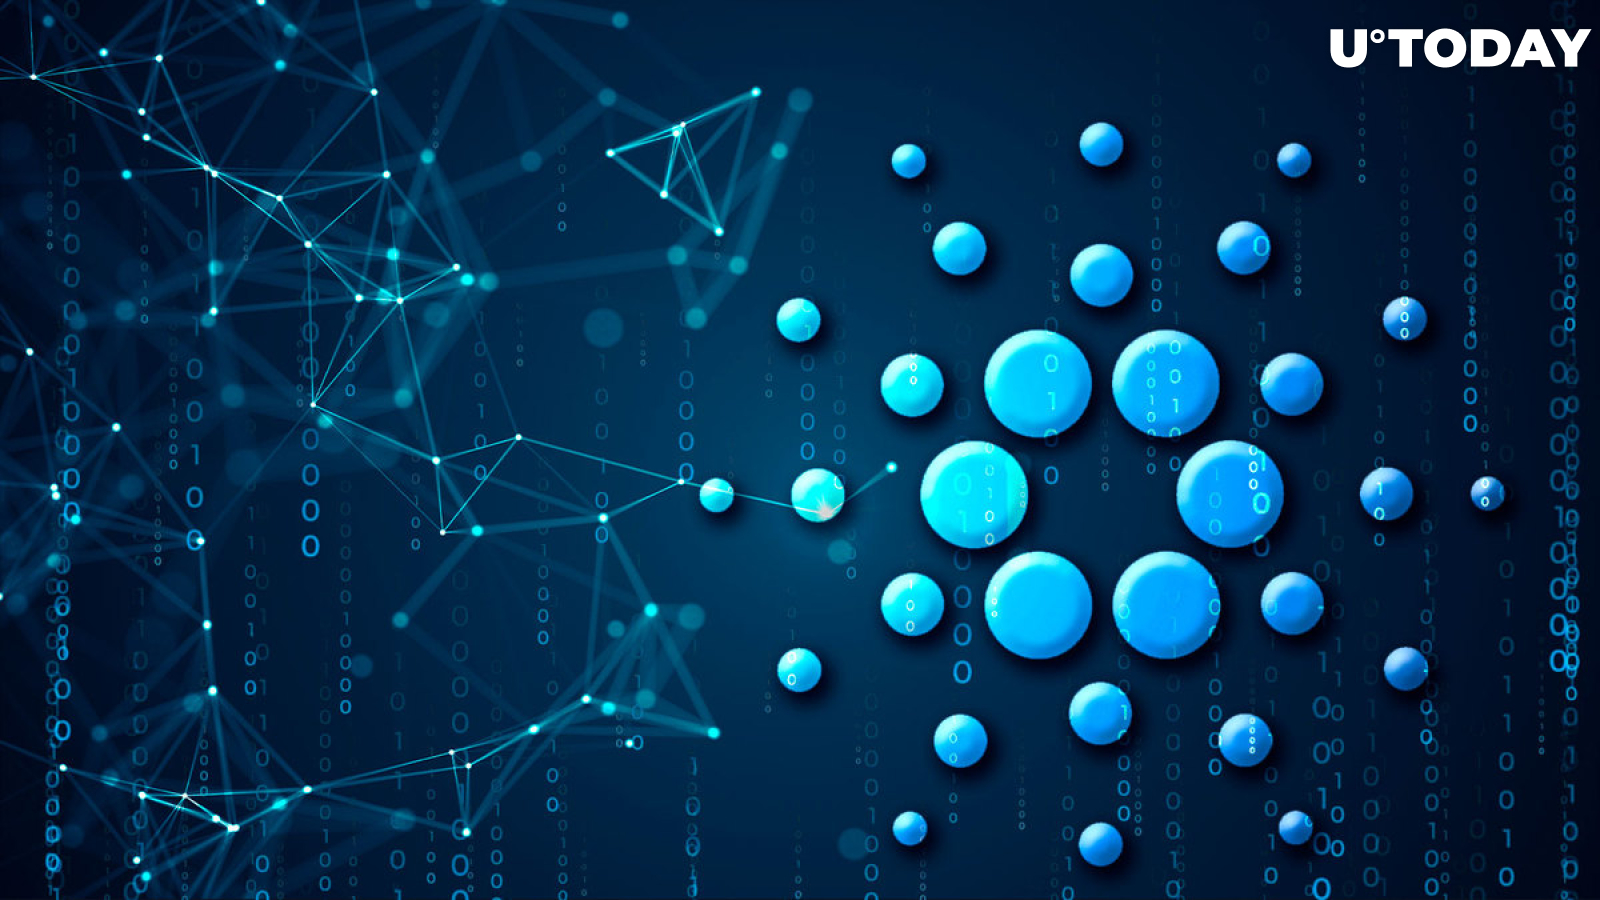 Here Is How Cardano-Based New Digital Economy Is Developing: Details